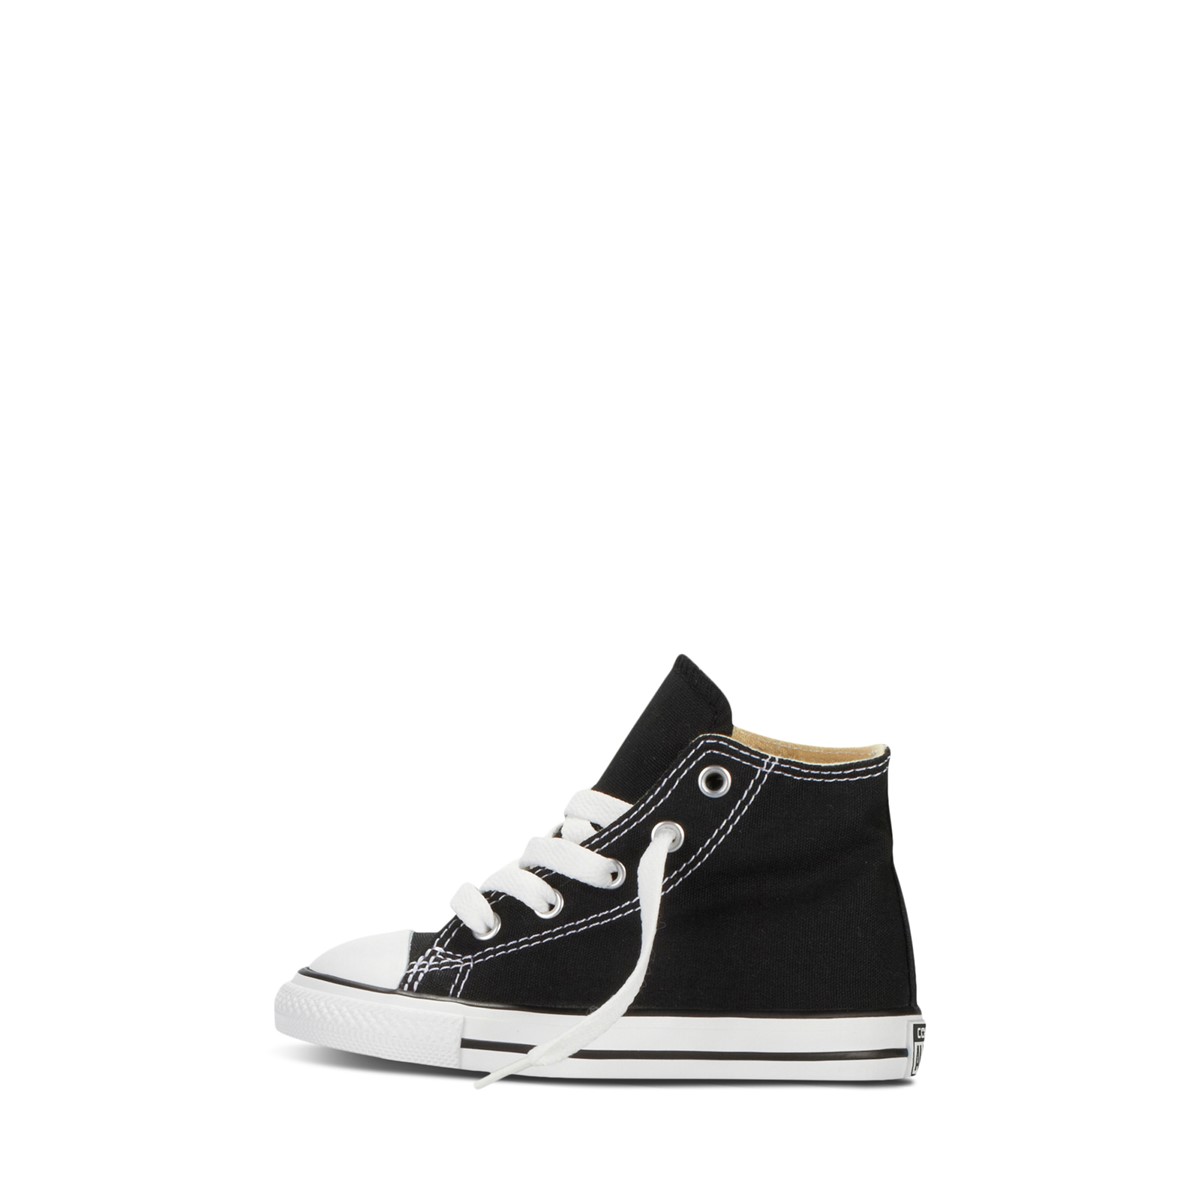 Toddler's Chuck Taylor All Star Hi Sneakers in Black/White | Little ...